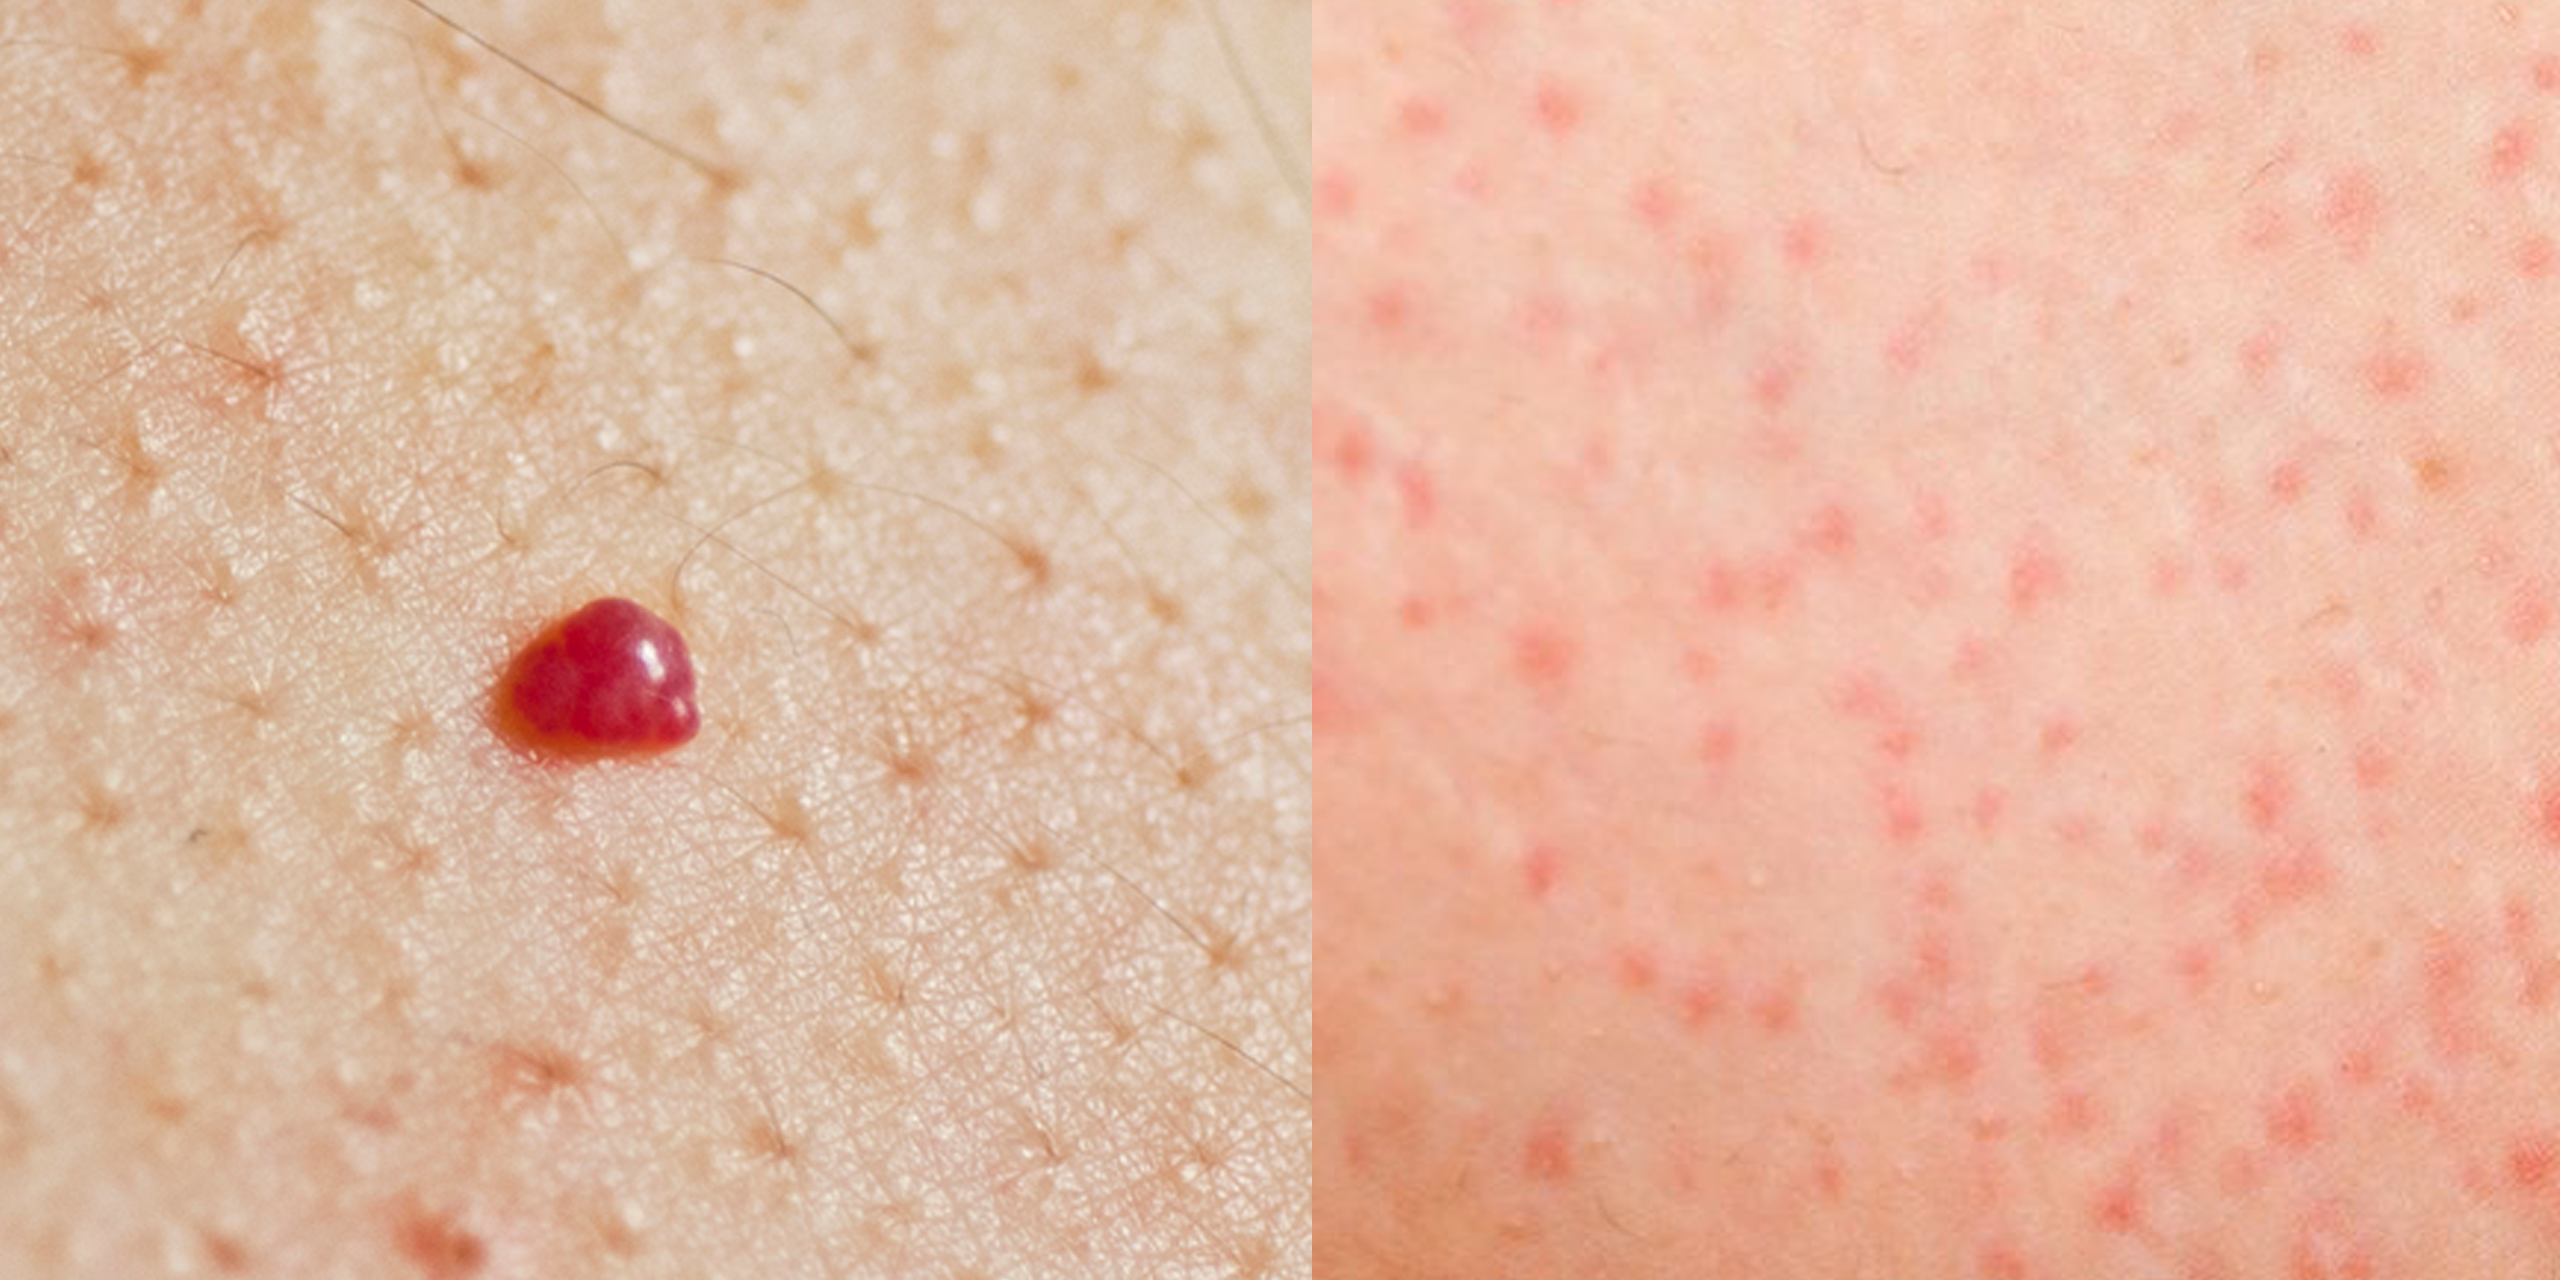 red pinpoint spots under your skin